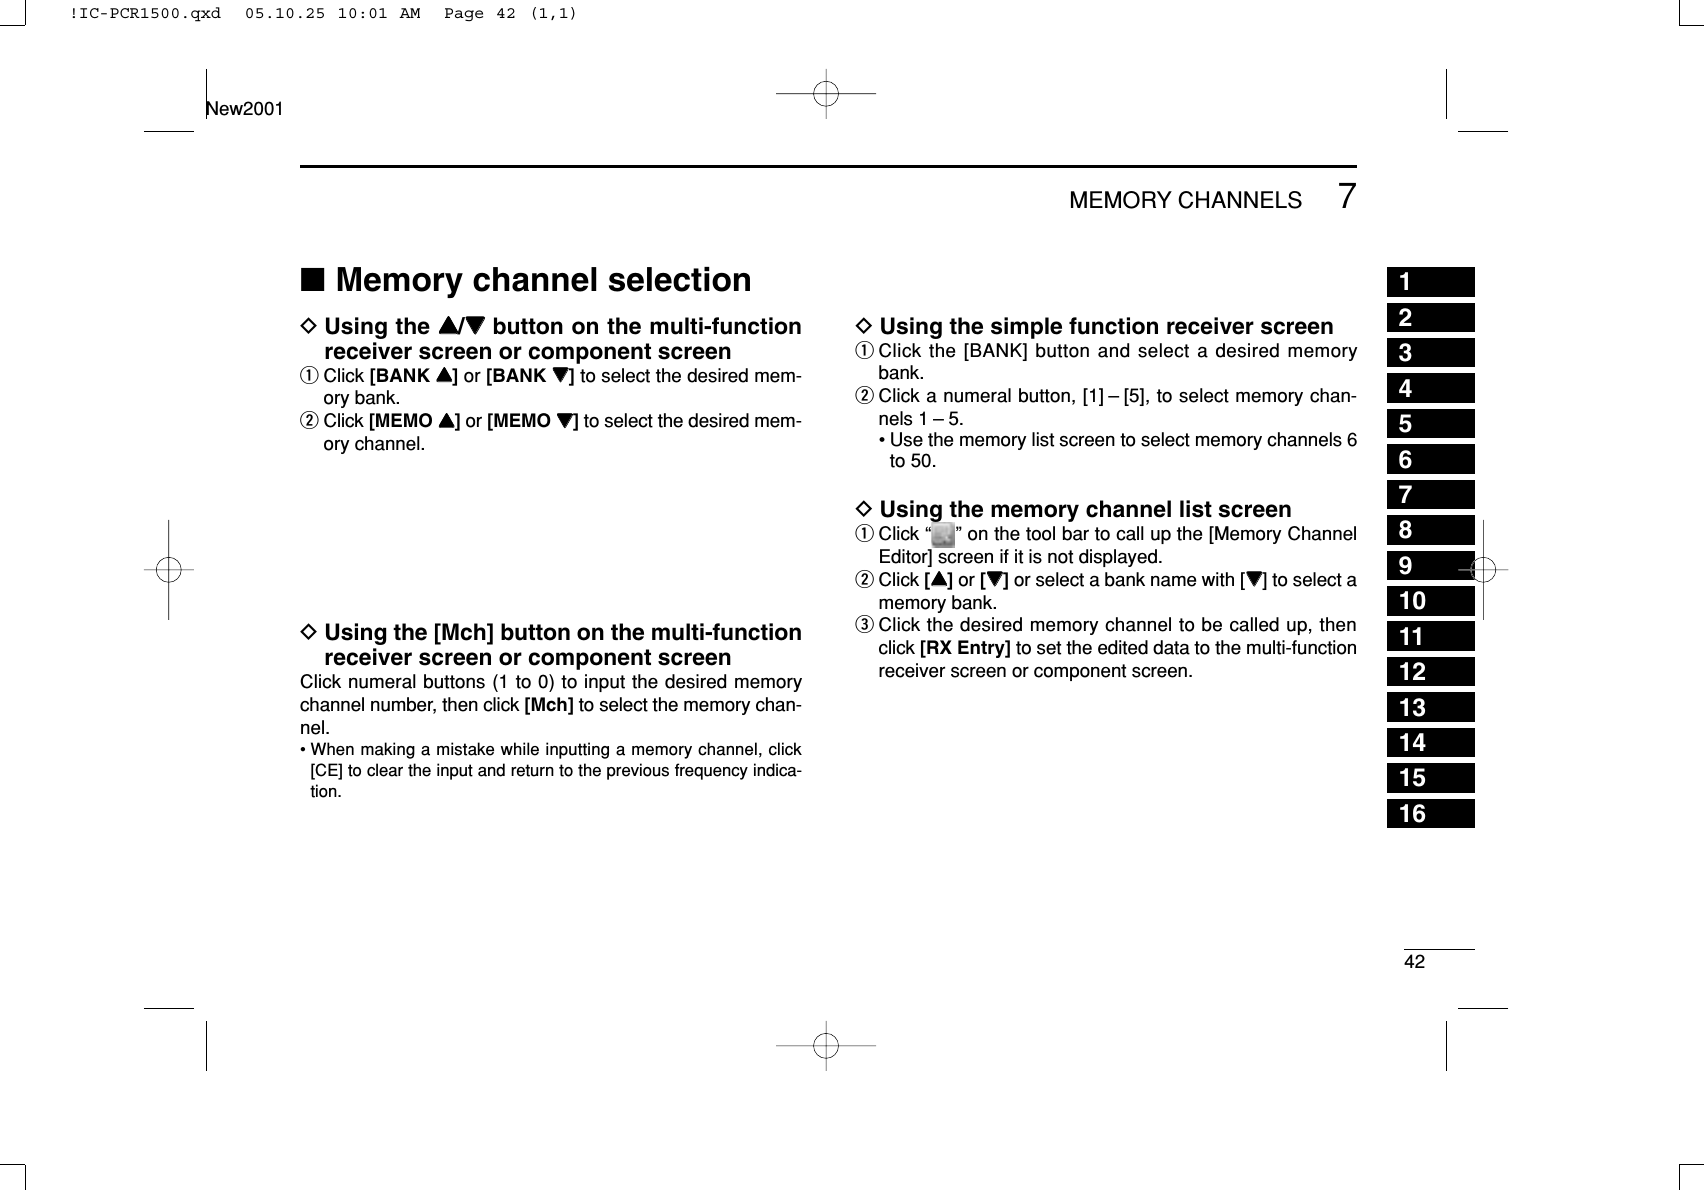 427MEMORY CHANNELS12345678910111213141516New2001■Memory channel selectionDUsing the YY/ZZbutton on the multi-functionreceiver screen or component screenqClick [BANK YY]or [BANK ZZ]to select the desired mem-ory bank.wClick [MEMO YY]or [MEMO ZZ]to select the desired mem-ory channel.DUsing the [Mch] button on the multi-functionreceiver screen or component screenClick numeral buttons (1 to 0) to input the desired memorychannel number, then click [Mch] to select the memory chan-nel.• When making a mistake while inputting a memory channel, click[CE] to clear the input and return to the previous frequency indica-tion.DUsing the simple function receiver screenqClick the [BANK] button and select a desired memorybank.wClick a numeral button, [1] – [5], to select memory chan-nels 1 – 5.• Use the memory list screen to select memory channels 6to 50.DUsing the memory channel list screenqClick “ ” on the tool bar to call up the [Memory ChannelEditor] screen if it is not displayed.wClick [YY]or [ZZ]or select a bank name with [ZZ] to select amemory bank.eClick the desired memory channel to be called up, thenclick [RX Entry] to set the edited data to the multi-functionreceiver screen or component screen.!IC-PCR1500.qxd  05.10.25 10:01 AM  Page 42 (1,1)